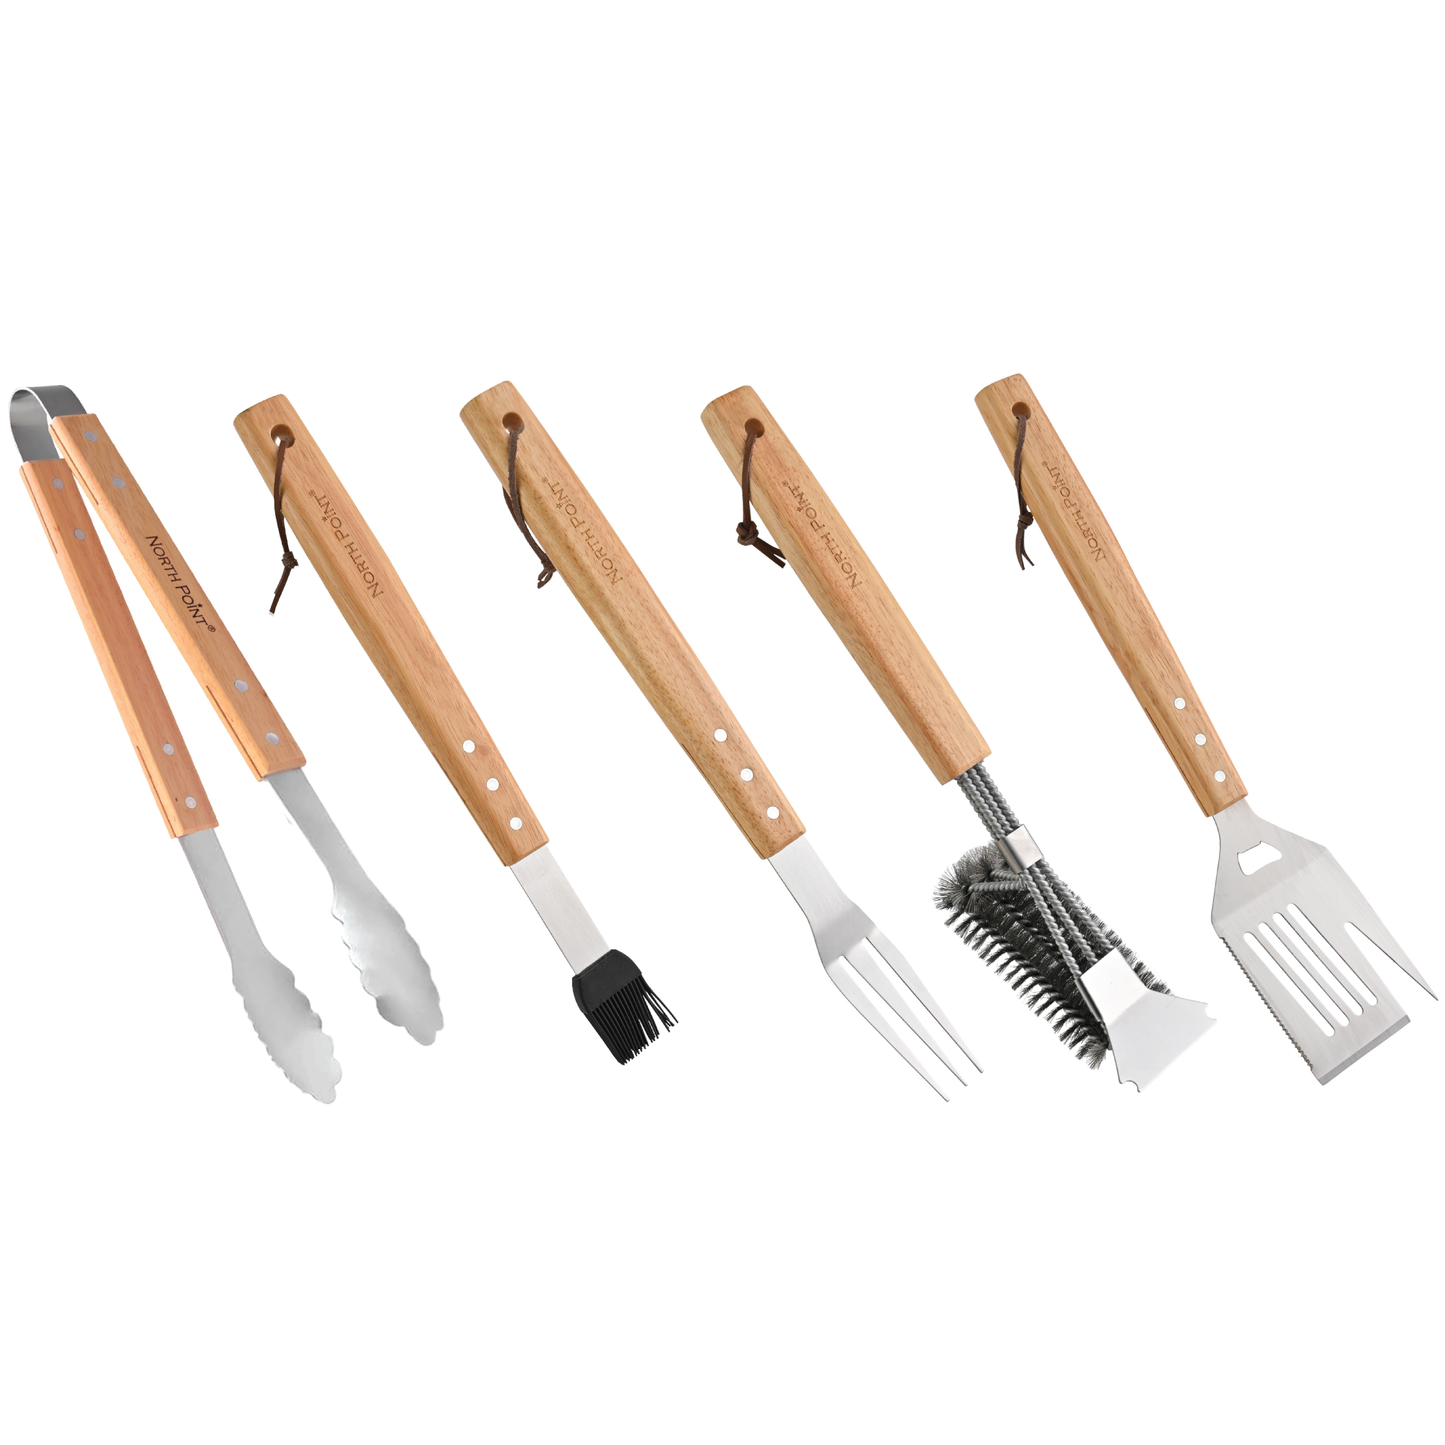 North Point® 5 Piece BBQ Tool Set with 1 5-in-1 Spatula, 1 Cleaning Brush, 1 Fork, 1 Basting Brush and 1 Tongs with wooden handle